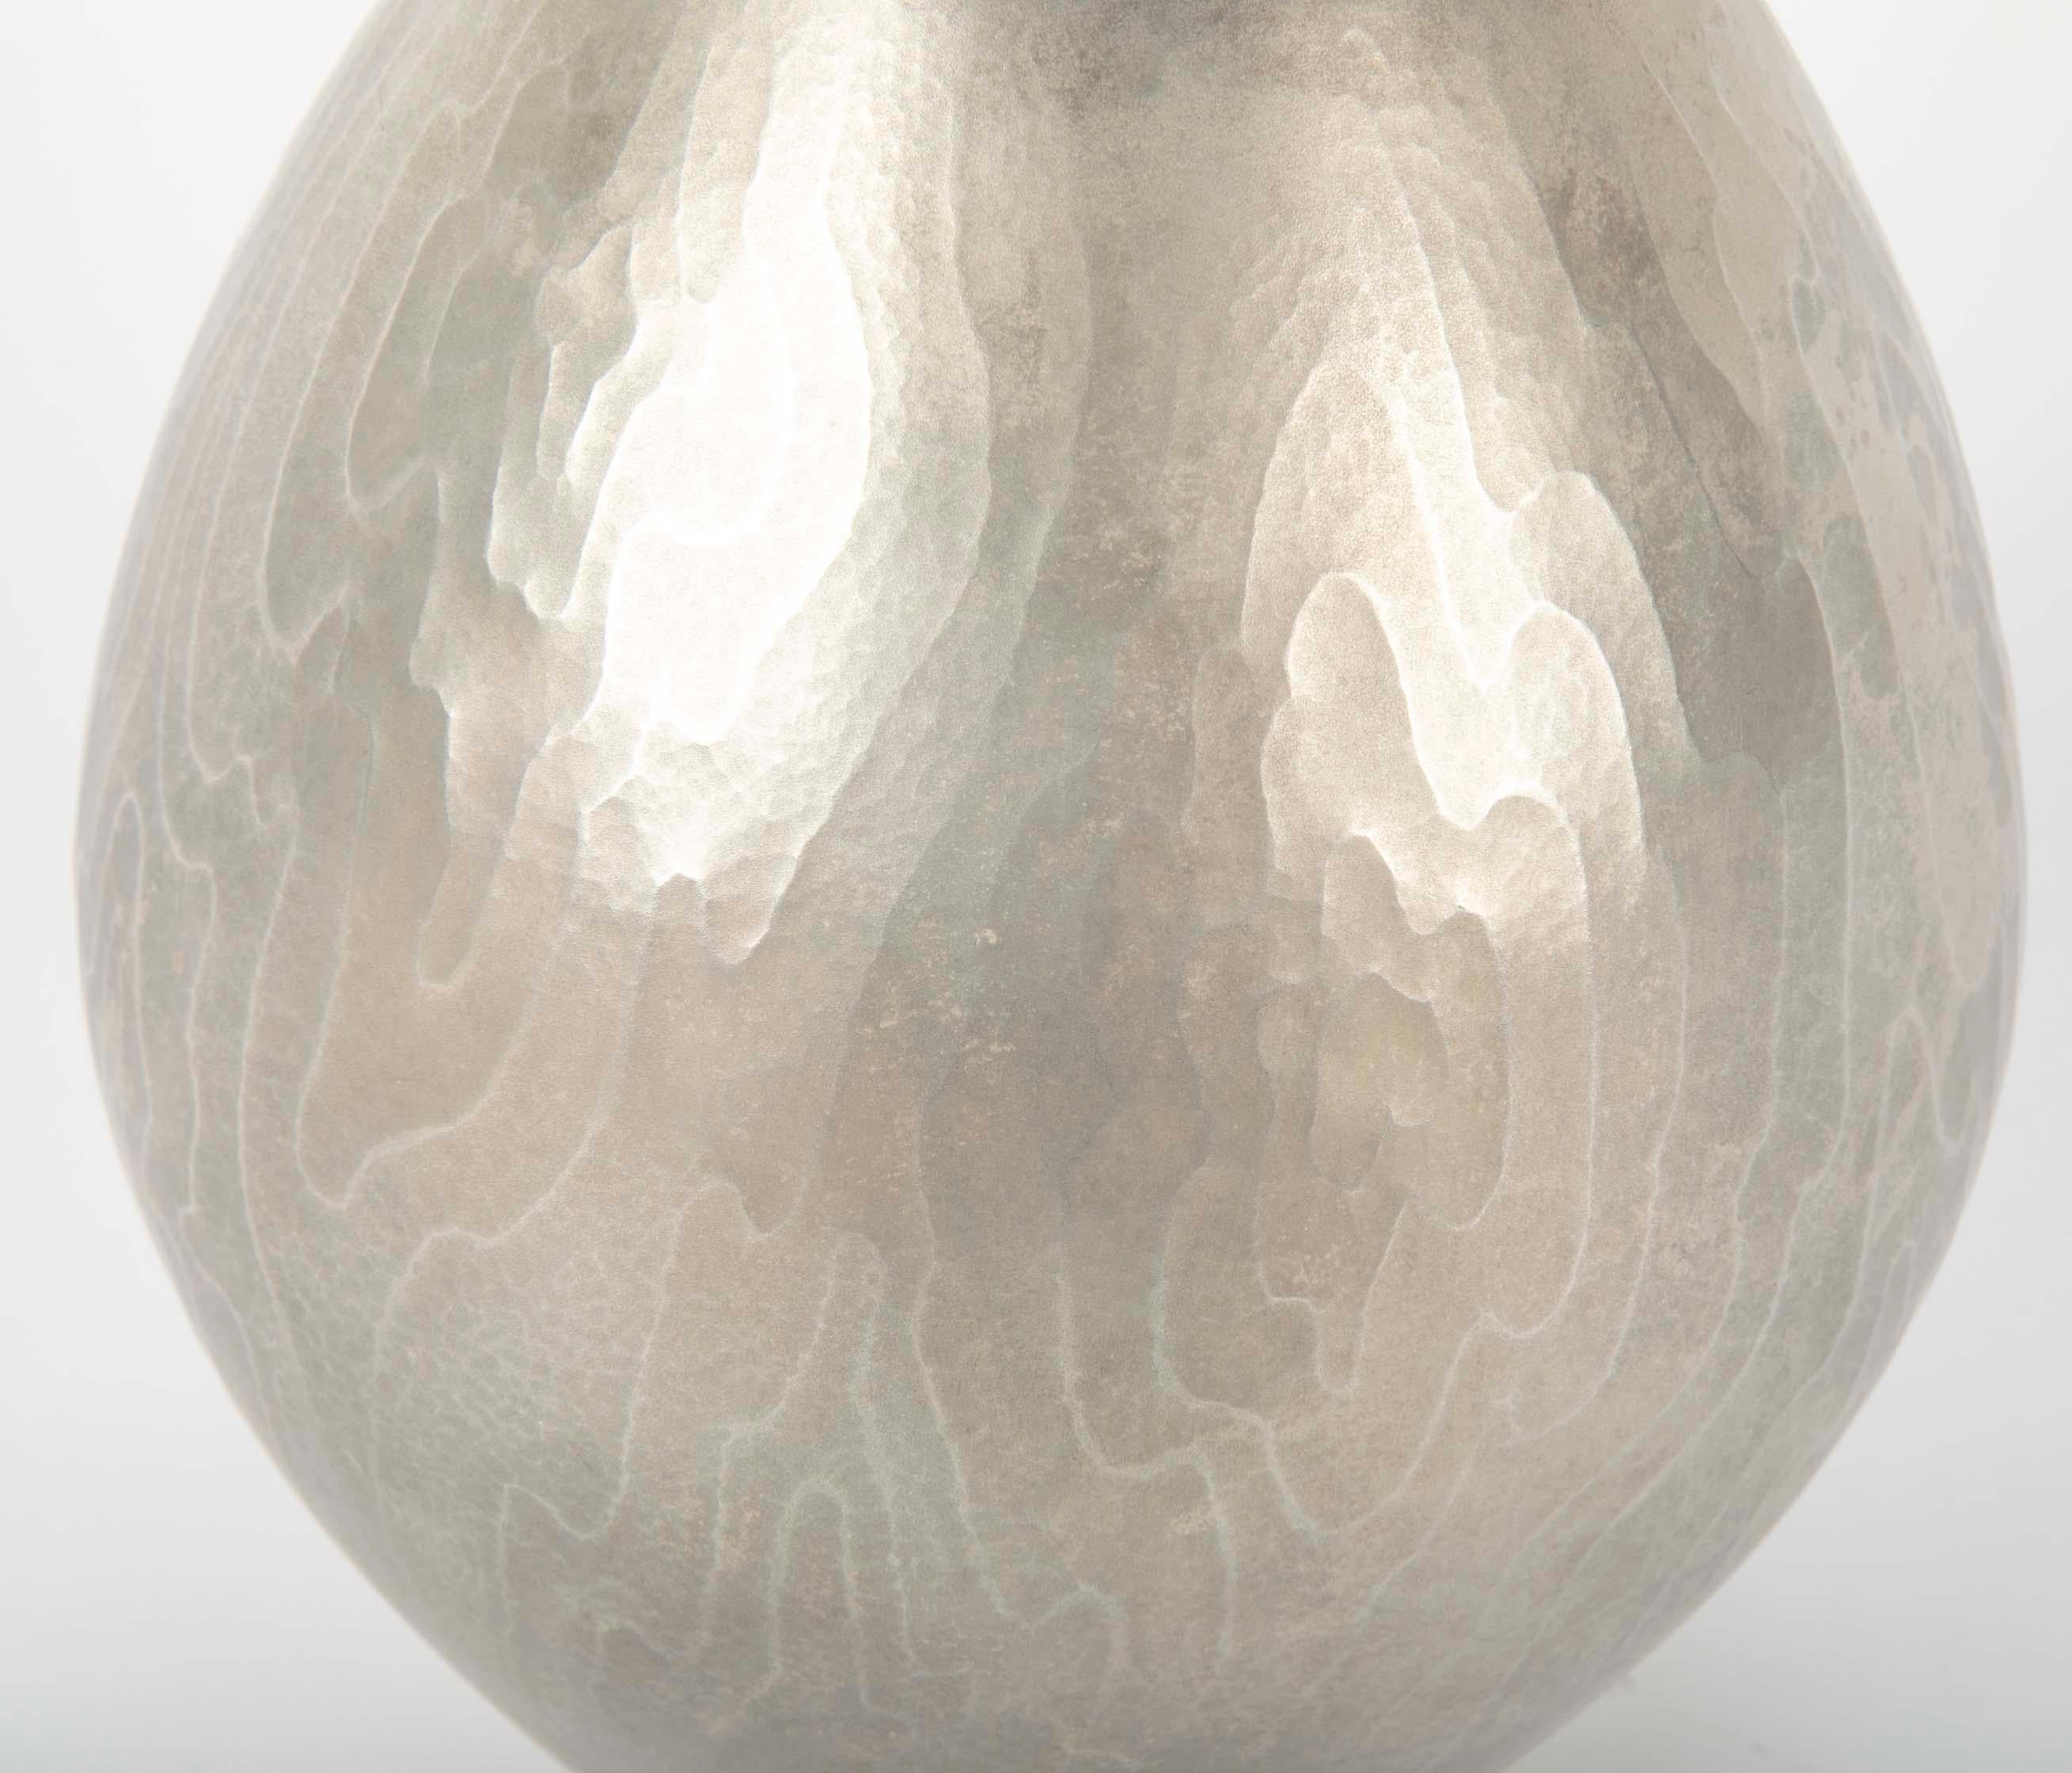 Repoussé Showa Hammered and Folded Japanese Silver Vase